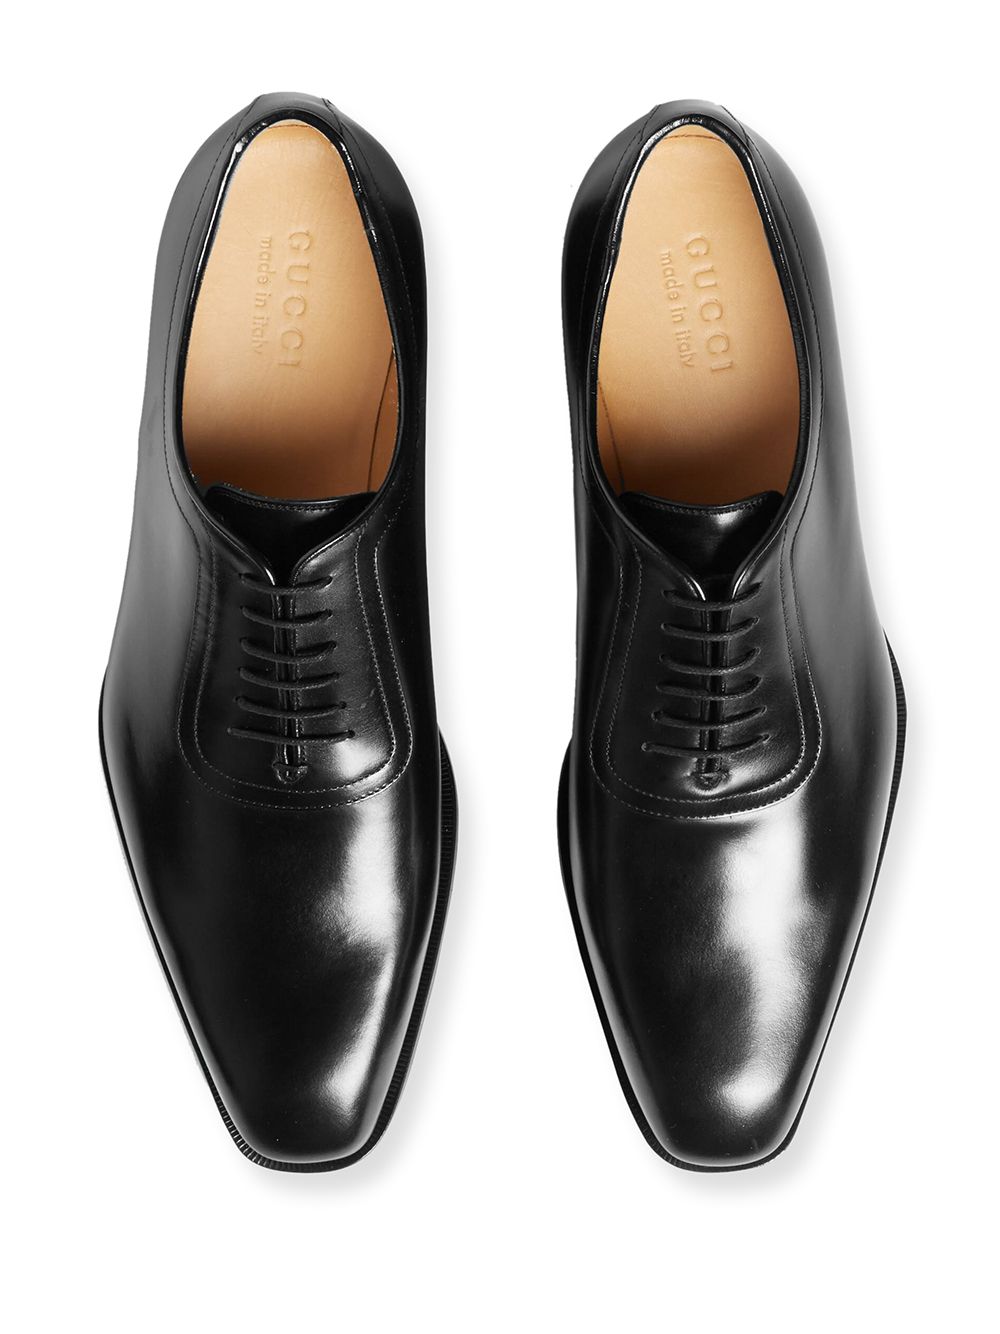 Shop Gucci lace-up Oxford shoes with Express Delivery - FARFETCH